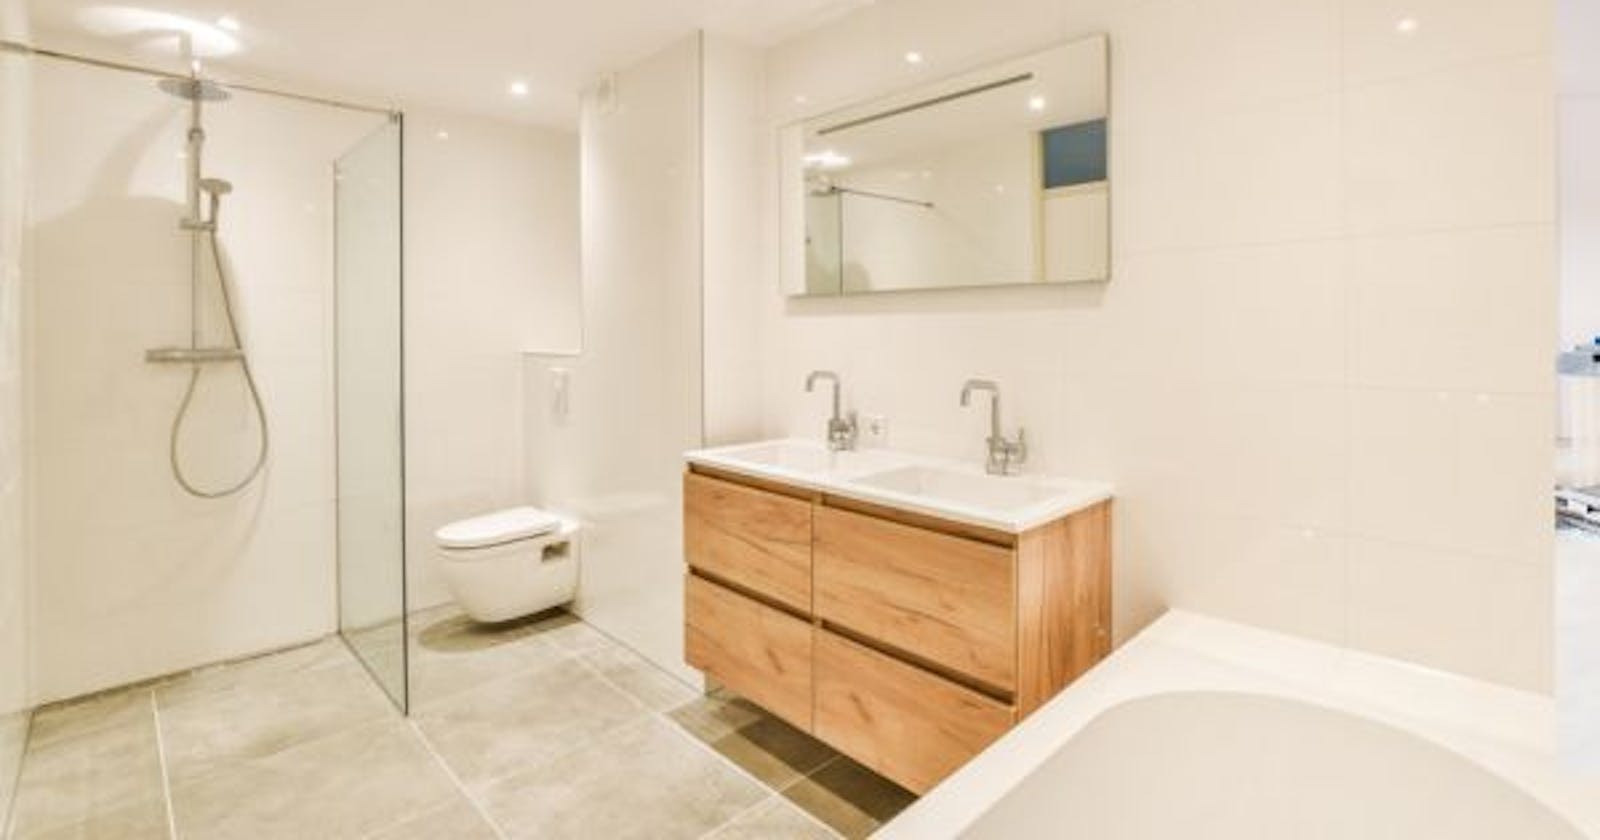 Top Reasons Why You Should Plan on Renovating Your Bathroom Now: